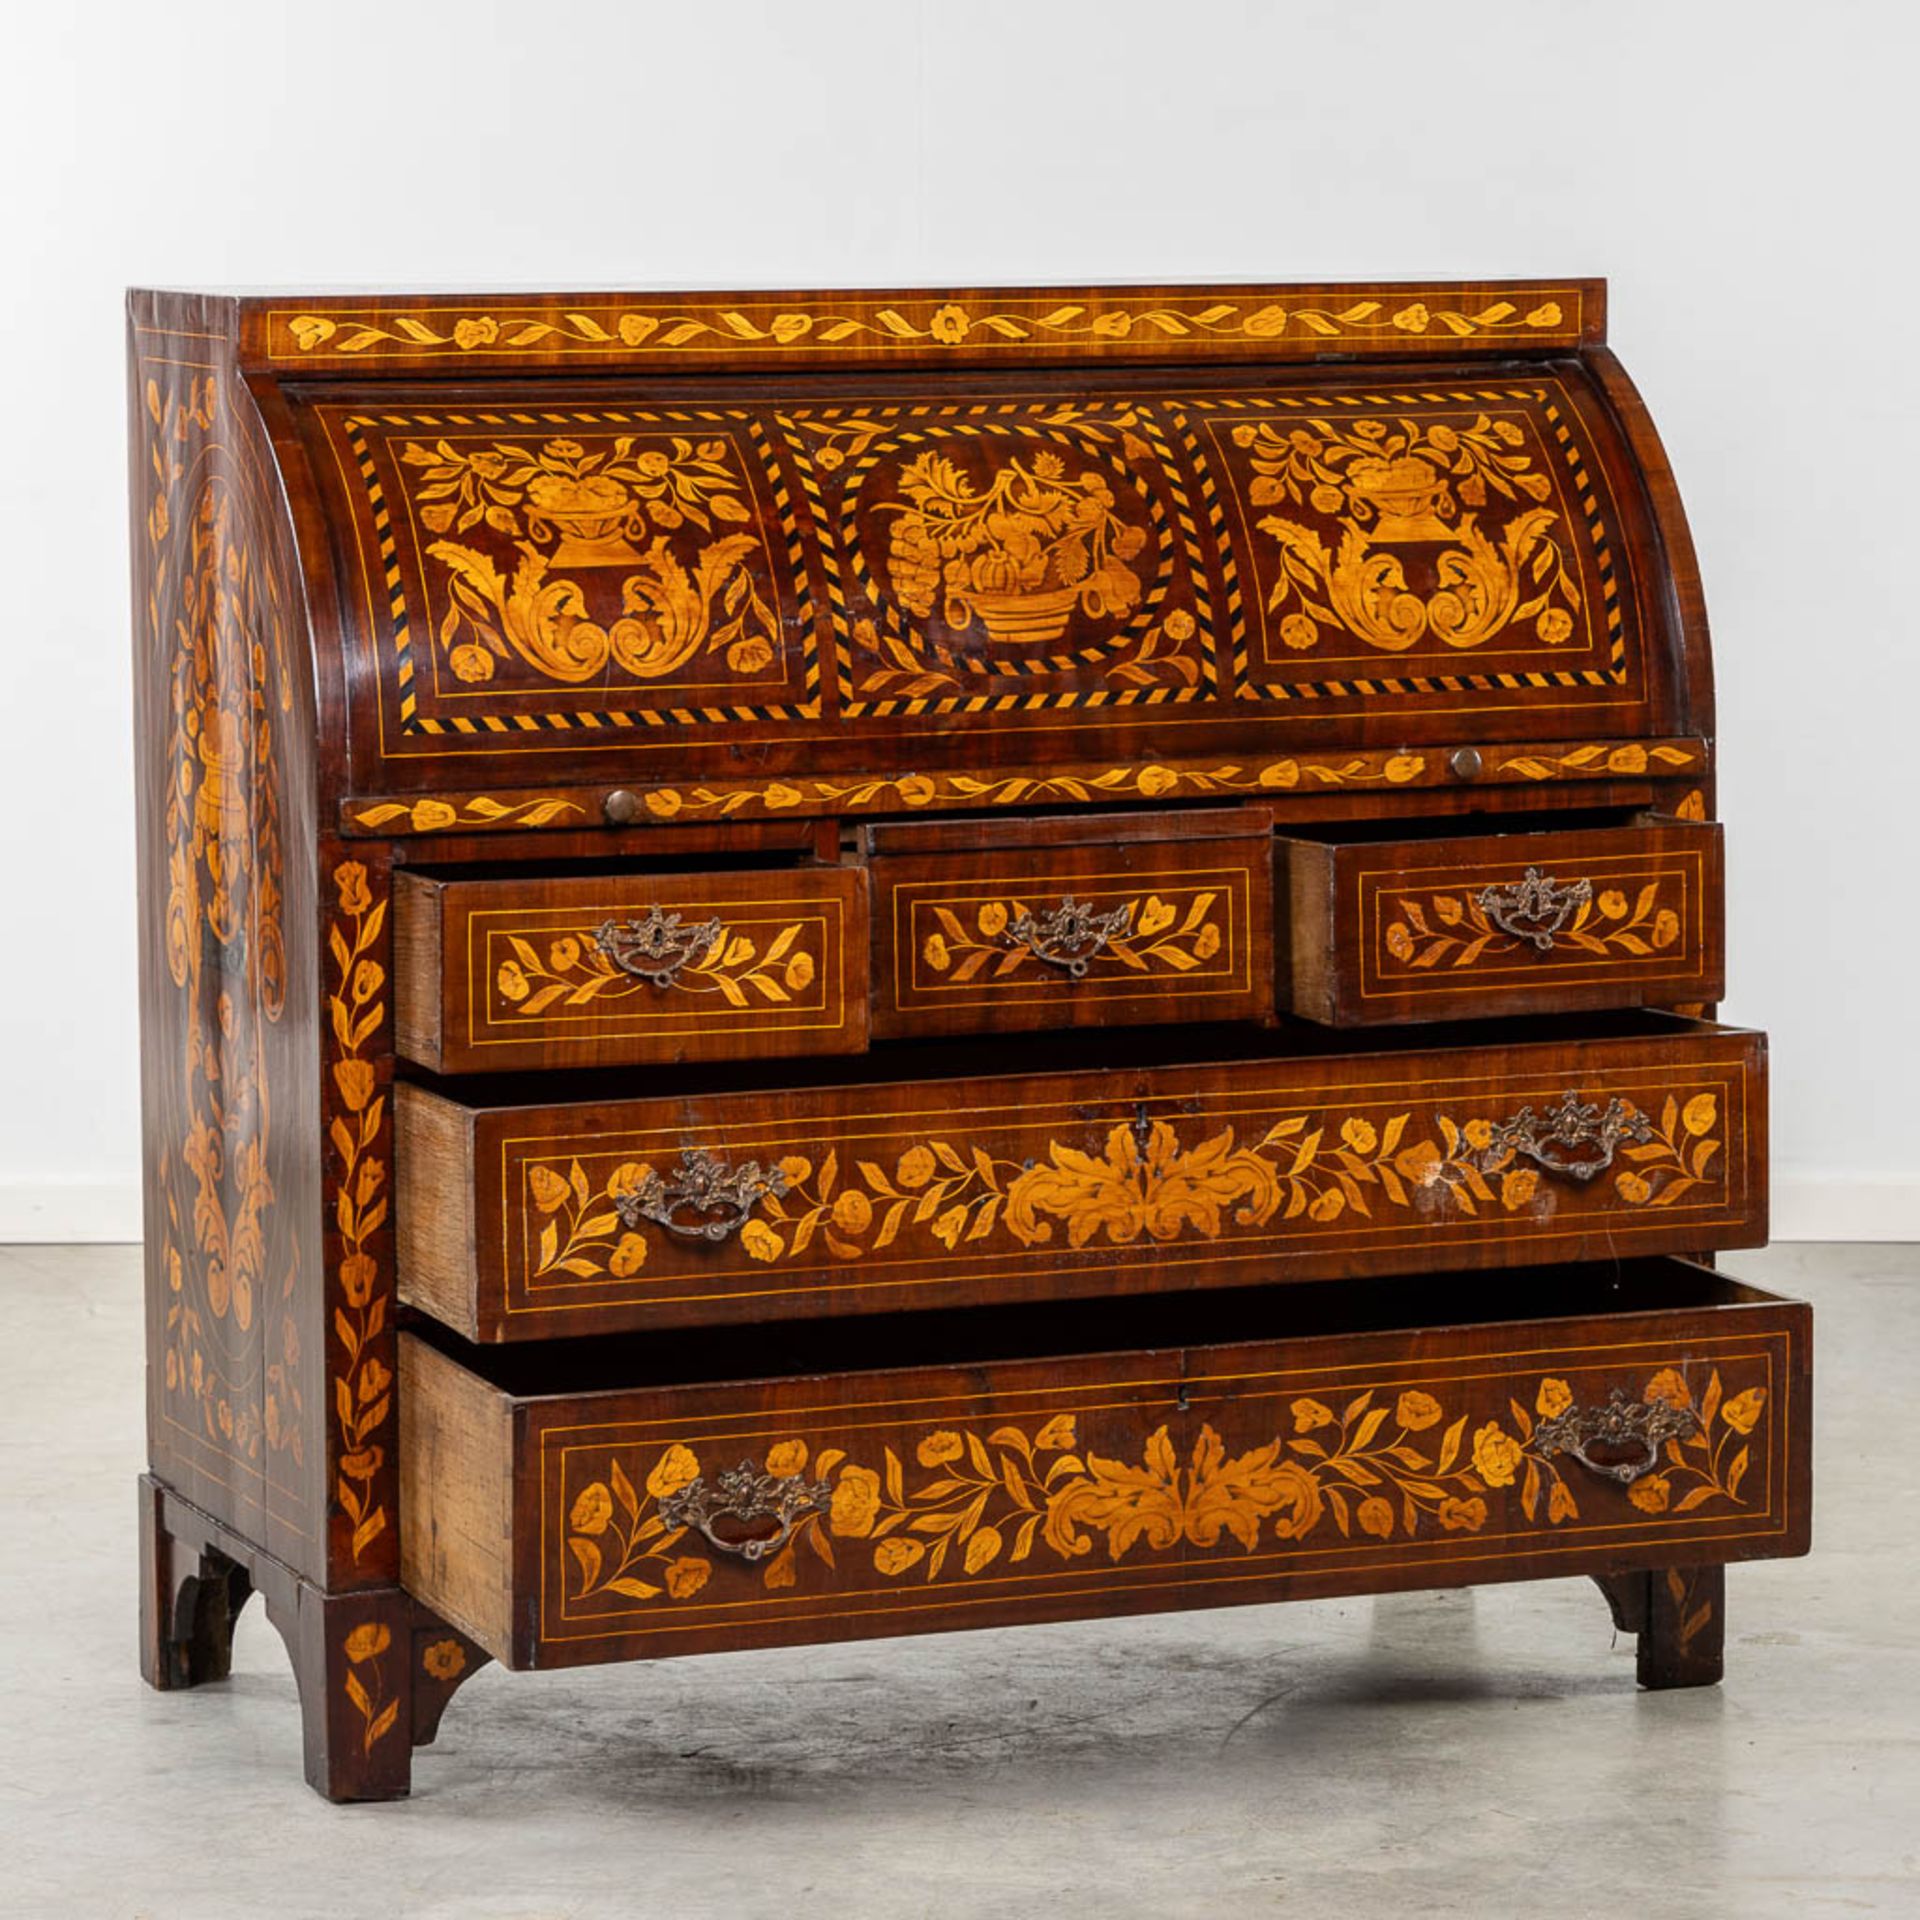 A fine marquetry inlay secretaire cabinet, The Netherlands, 18th C. (L:51 x W:112 x H:108 cm) - Image 5 of 20